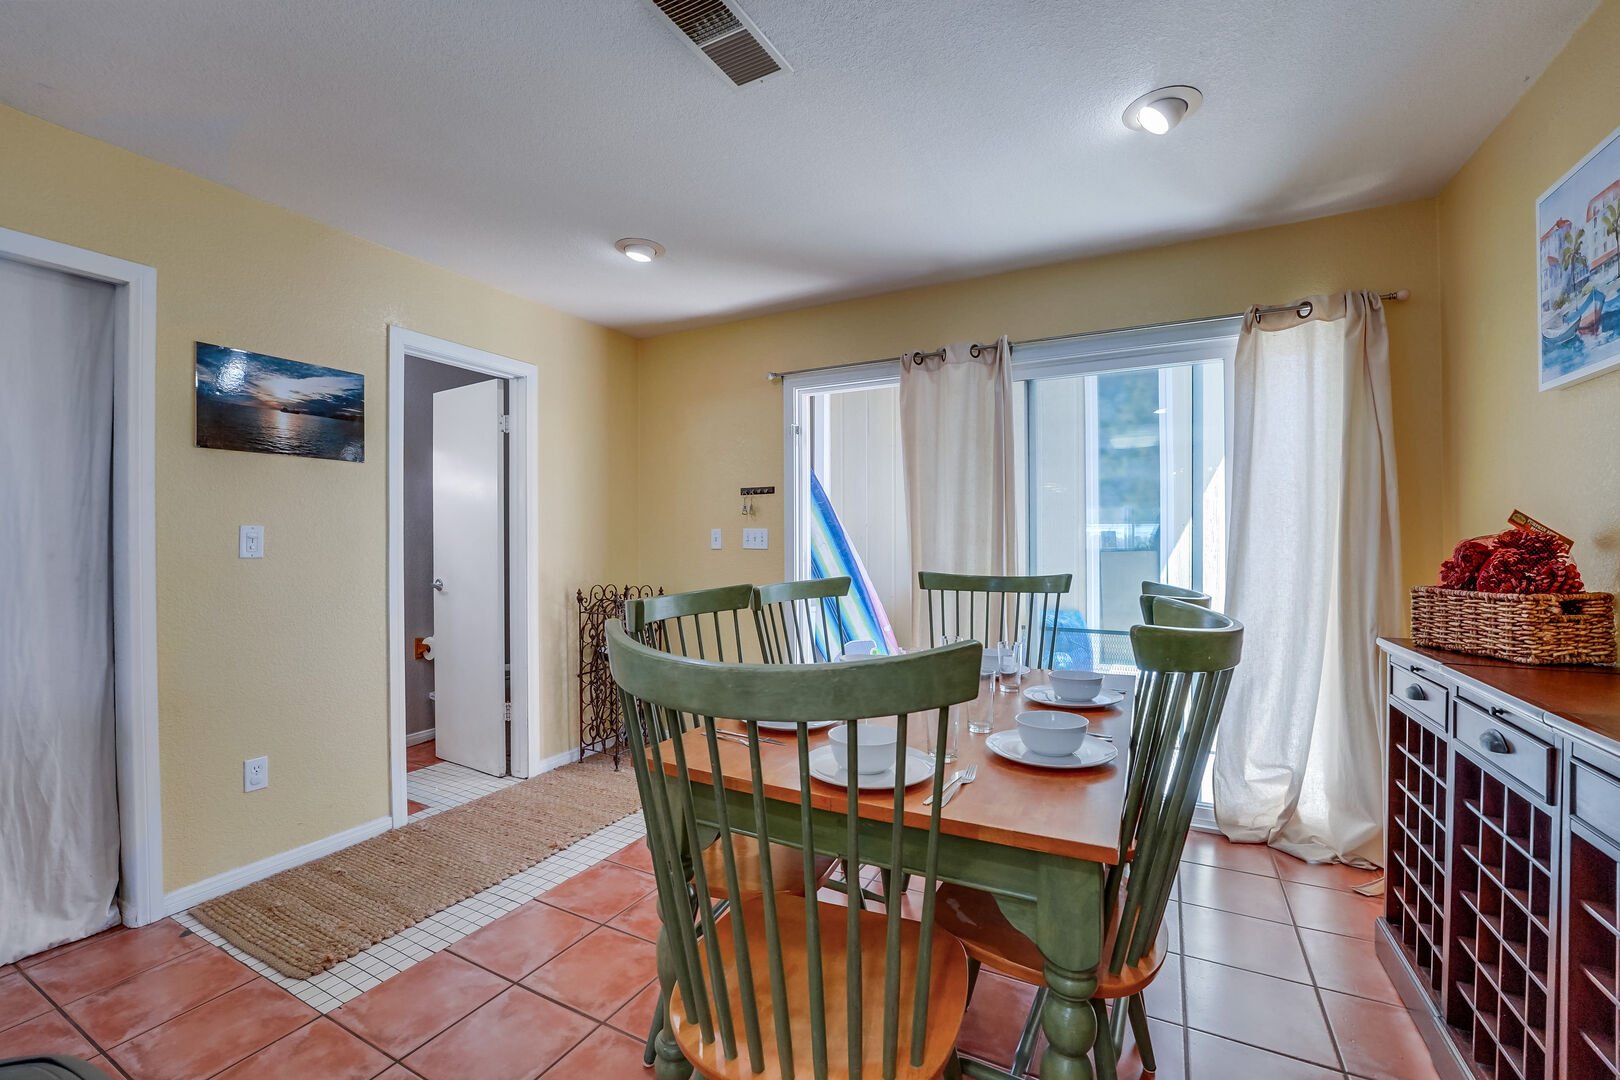 Kitchen area with dining table for 6 guests, half bathroom and back patio with washer/dryer and beach accessories